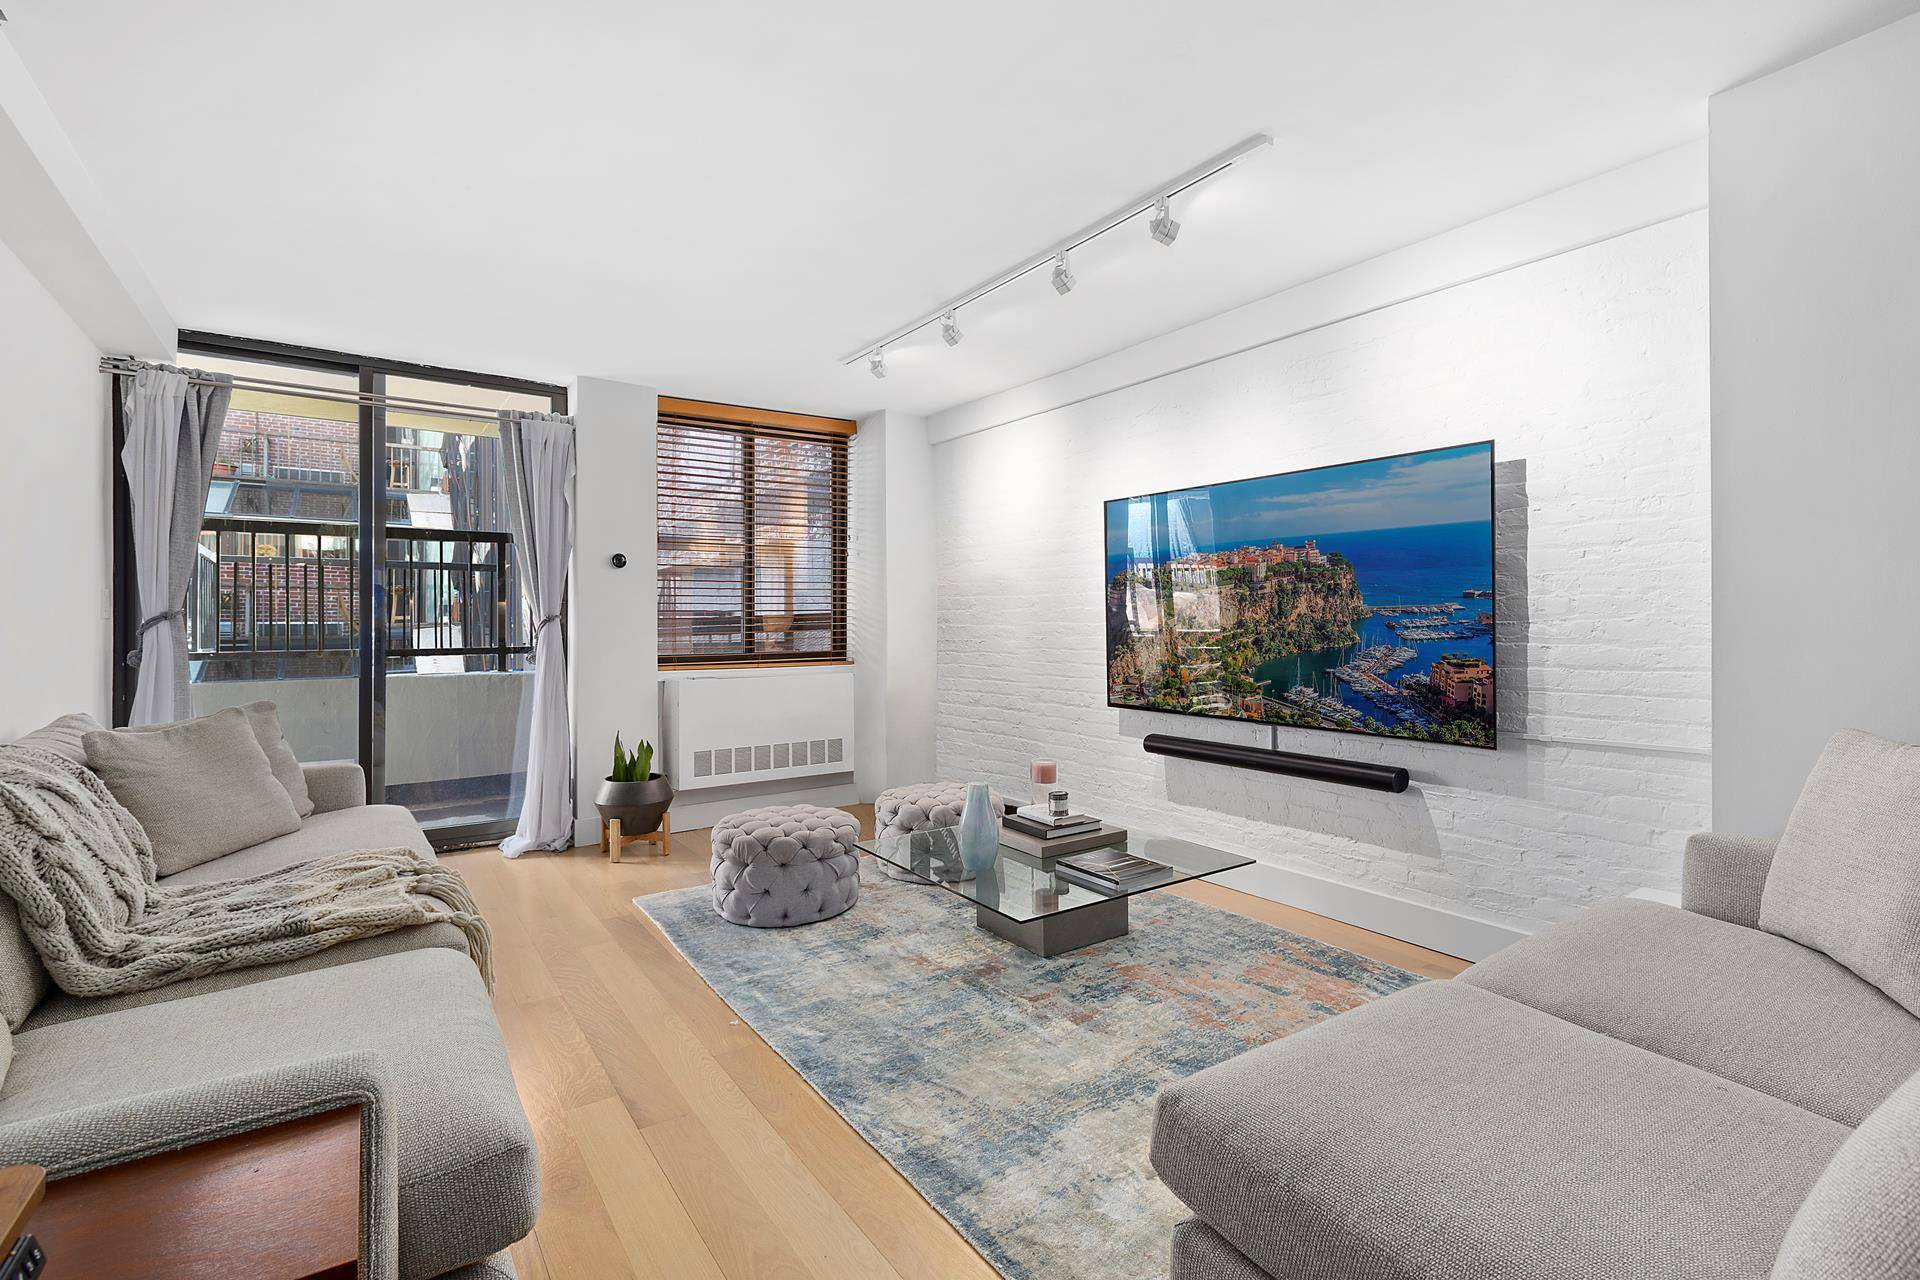 Welcome home to this stunning, mint condition 1BR 1BA West Village home with terrace tucked away in a private, boutique condo building on Jane Street.